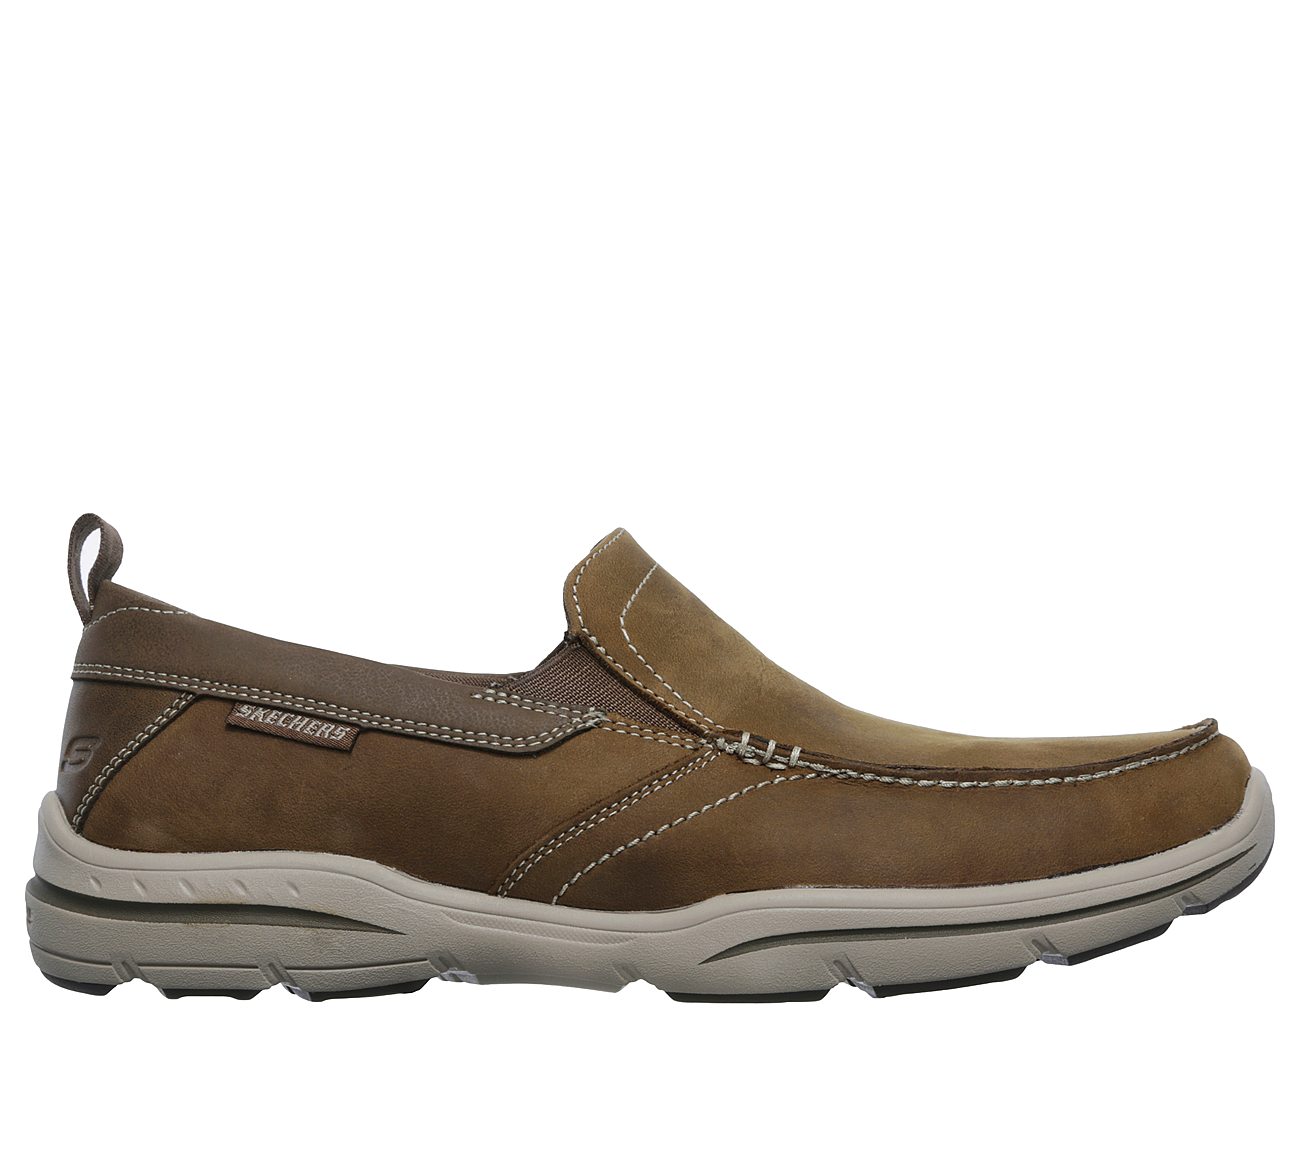 Buy SKECHERS Relaxed Fit: Harper - Forde USA Casuals Shoes